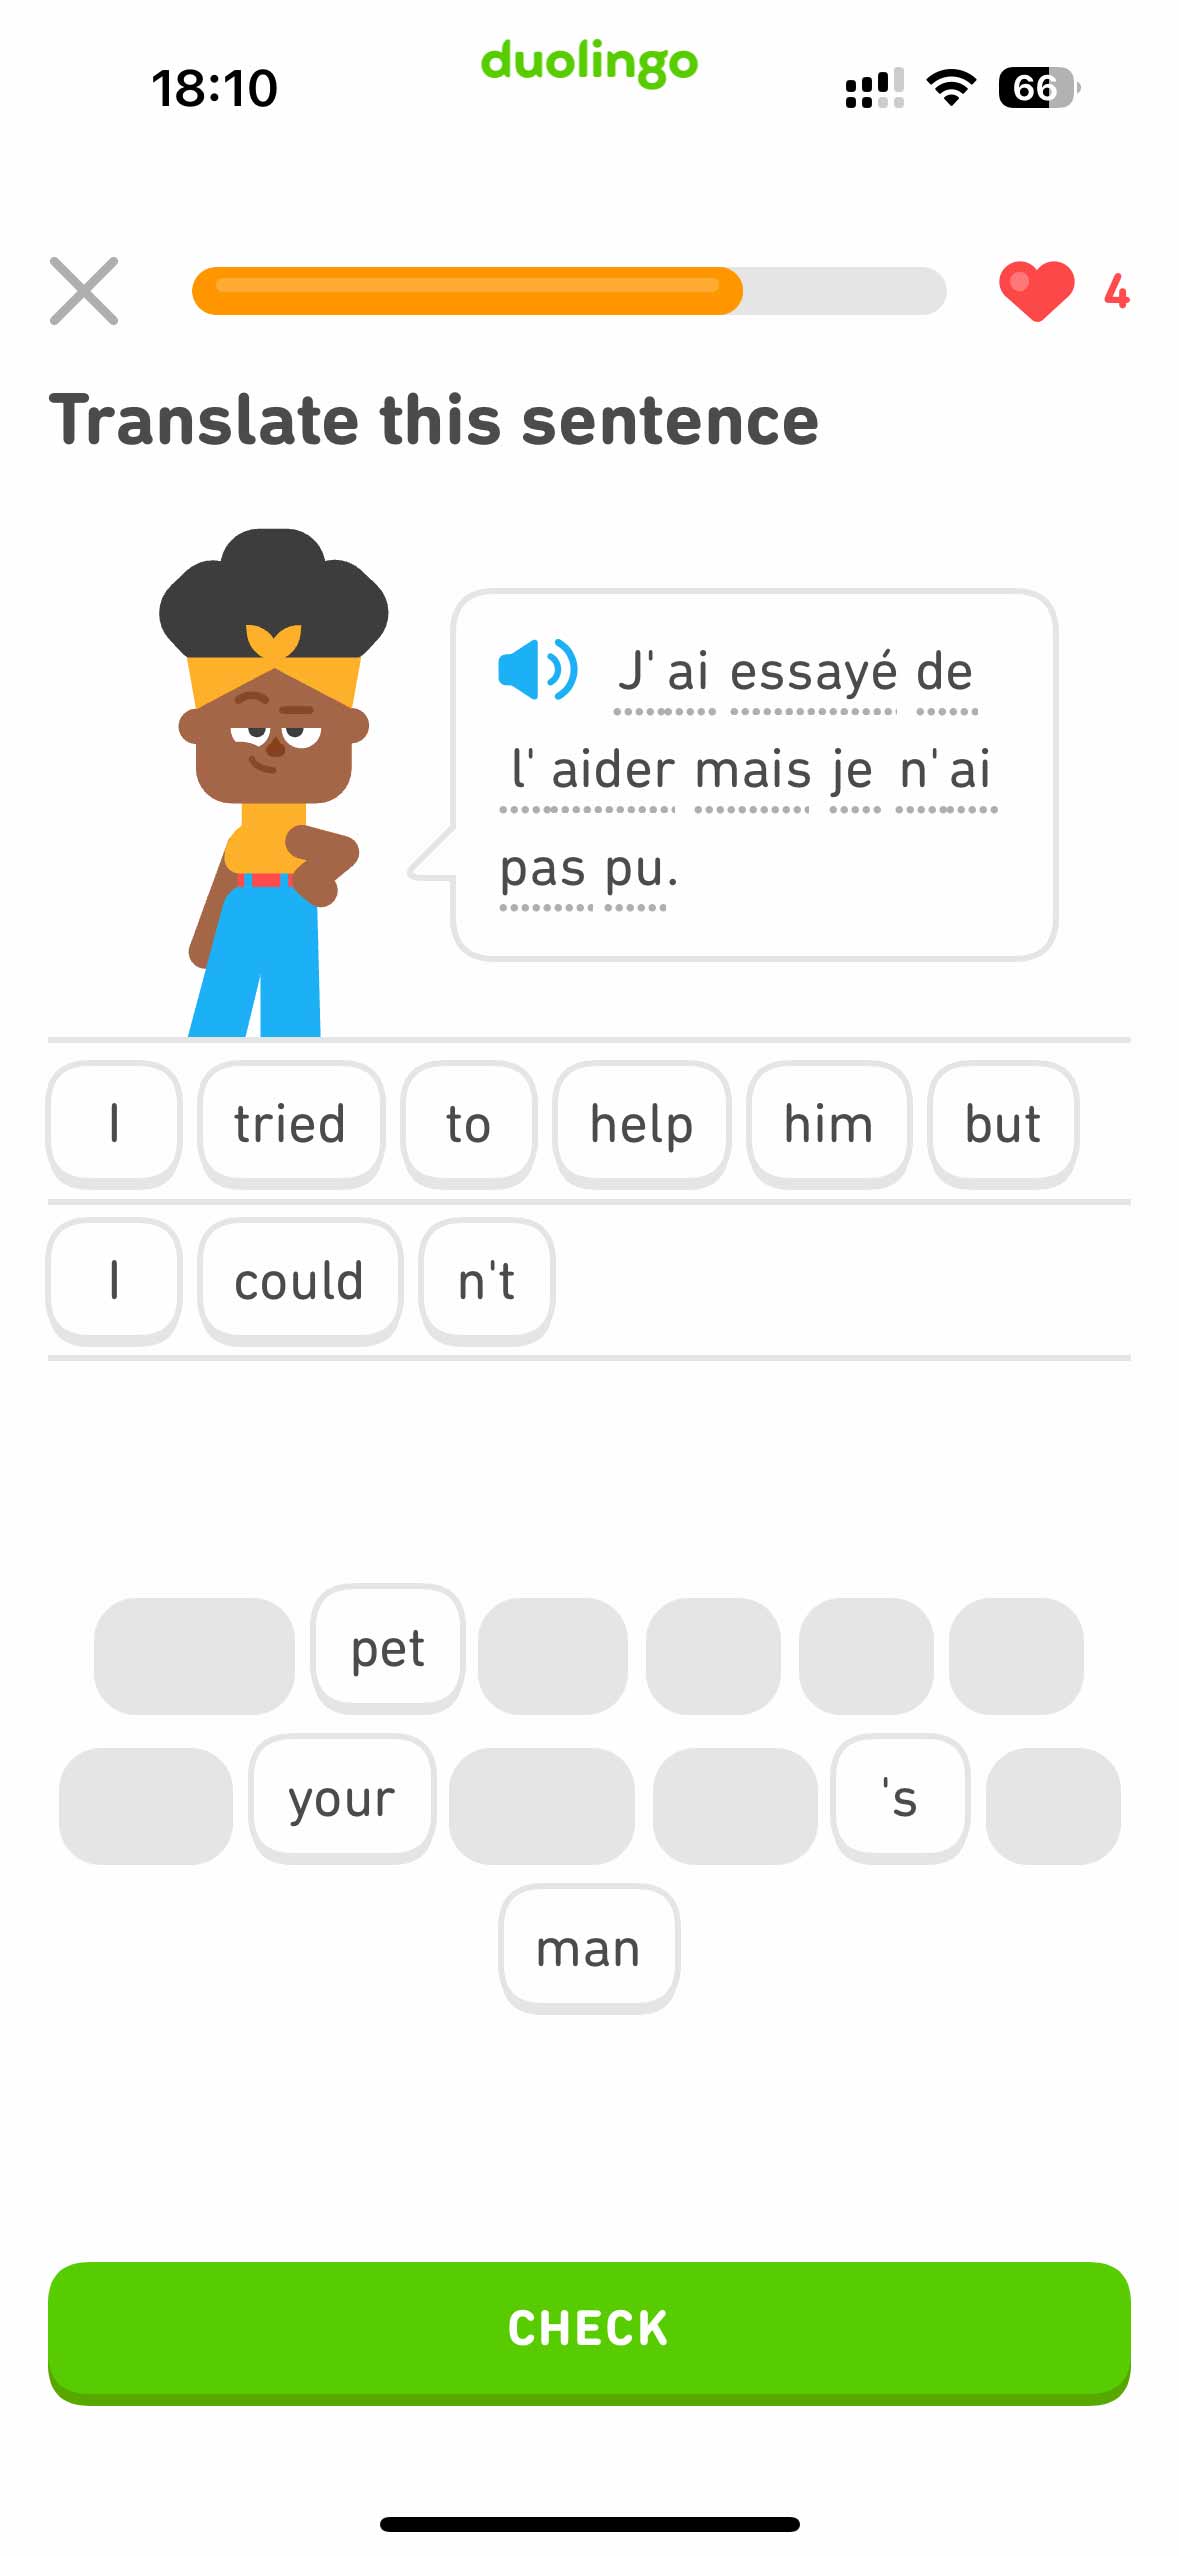 Duolingo translation exercise featuring word bubbles in the target language to be arranged into a correct sentence translation